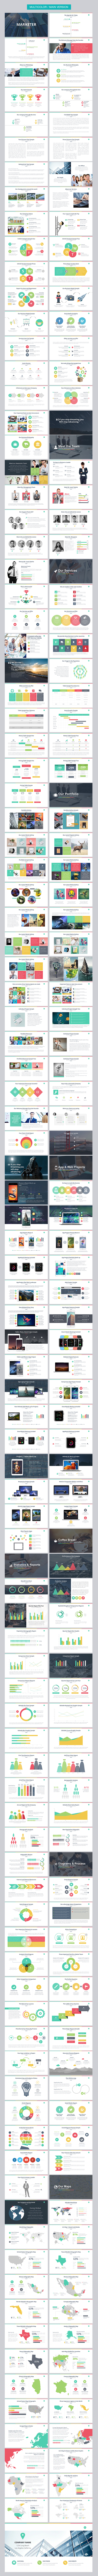 powerpoint template business report app mock up Modern Professional Presentation PPT PPTX louis twelve Pitch Deck Template Infographics Charts Reports Minimal Creative eCommerce Sales Marketing